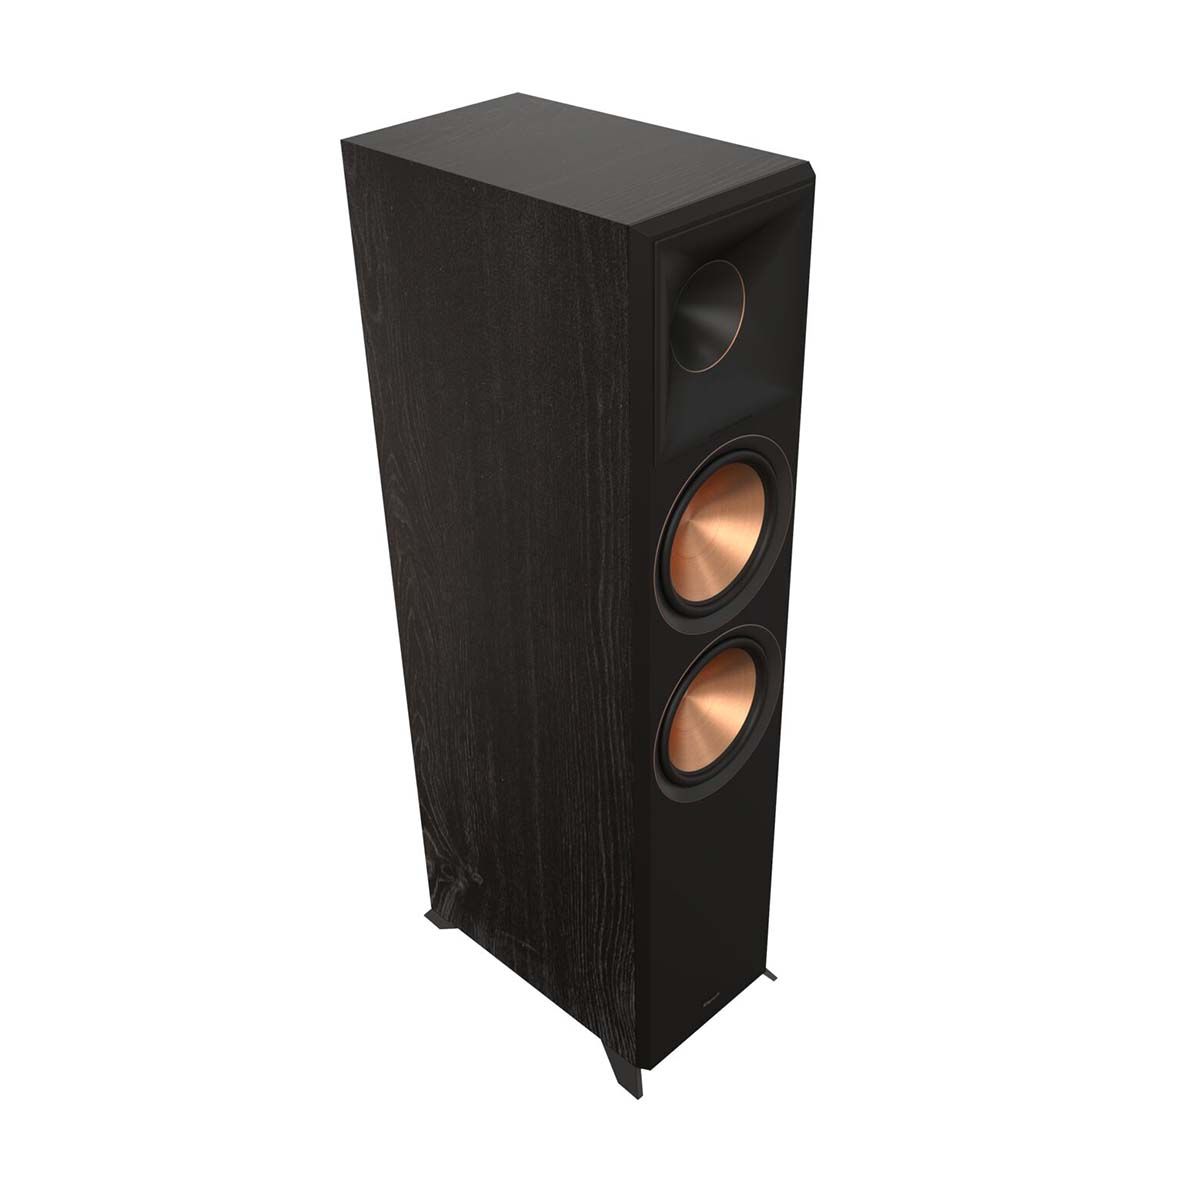 Klipsch RP-8000F II Floorstanding Speaker - Ebony - angled front view without grill